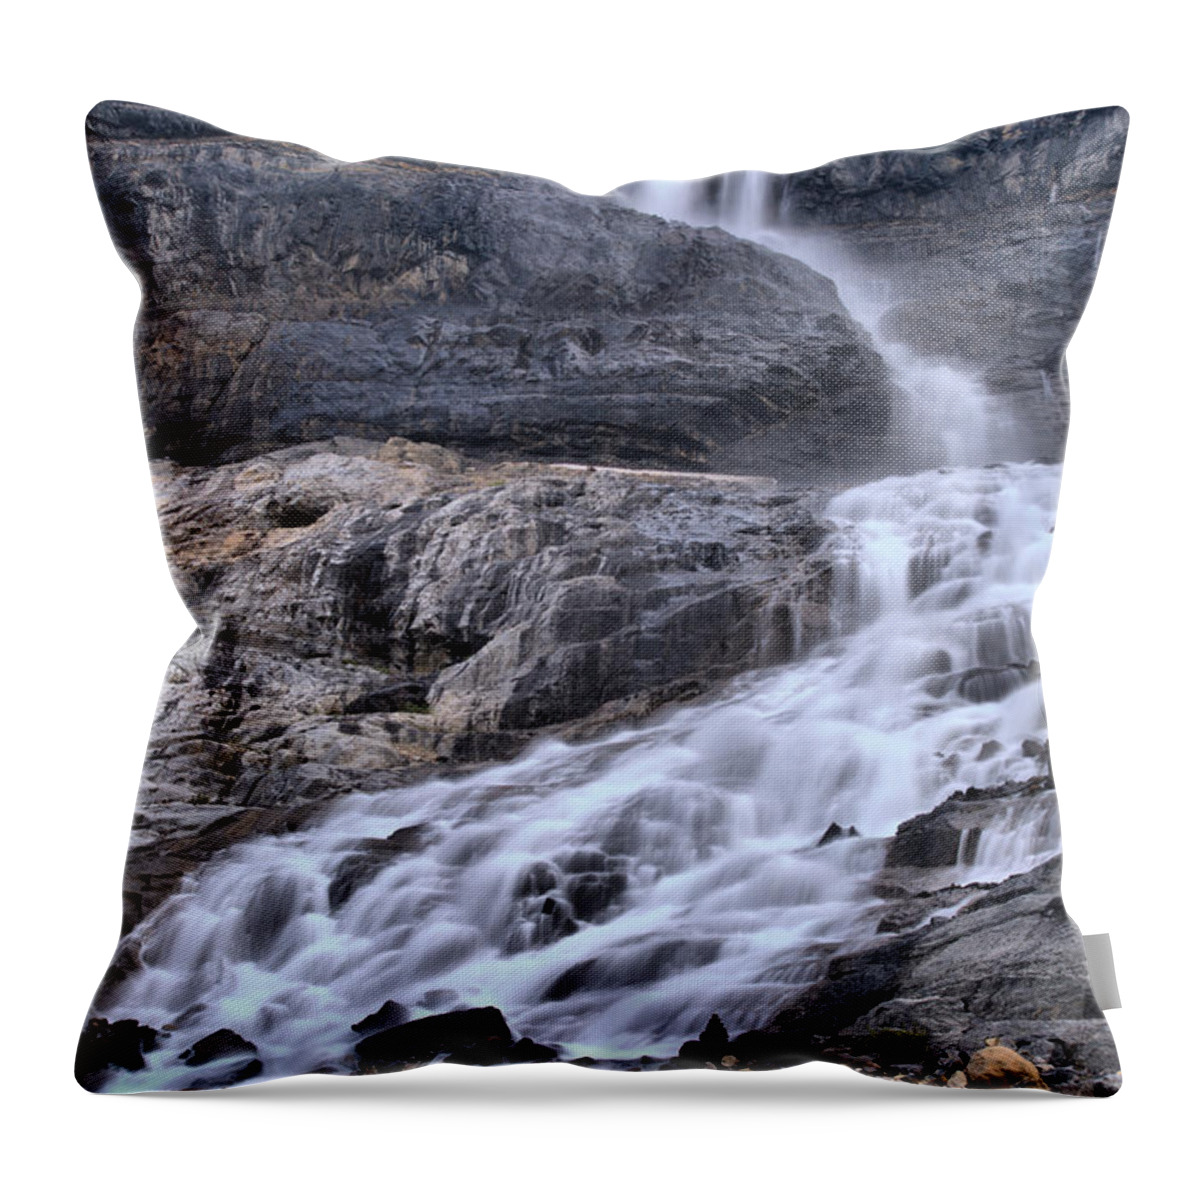 Bow Glacier Falls Throw Pillow featuring the photograph Banff Bow Glacier Falls Portrait by Adam Jewell